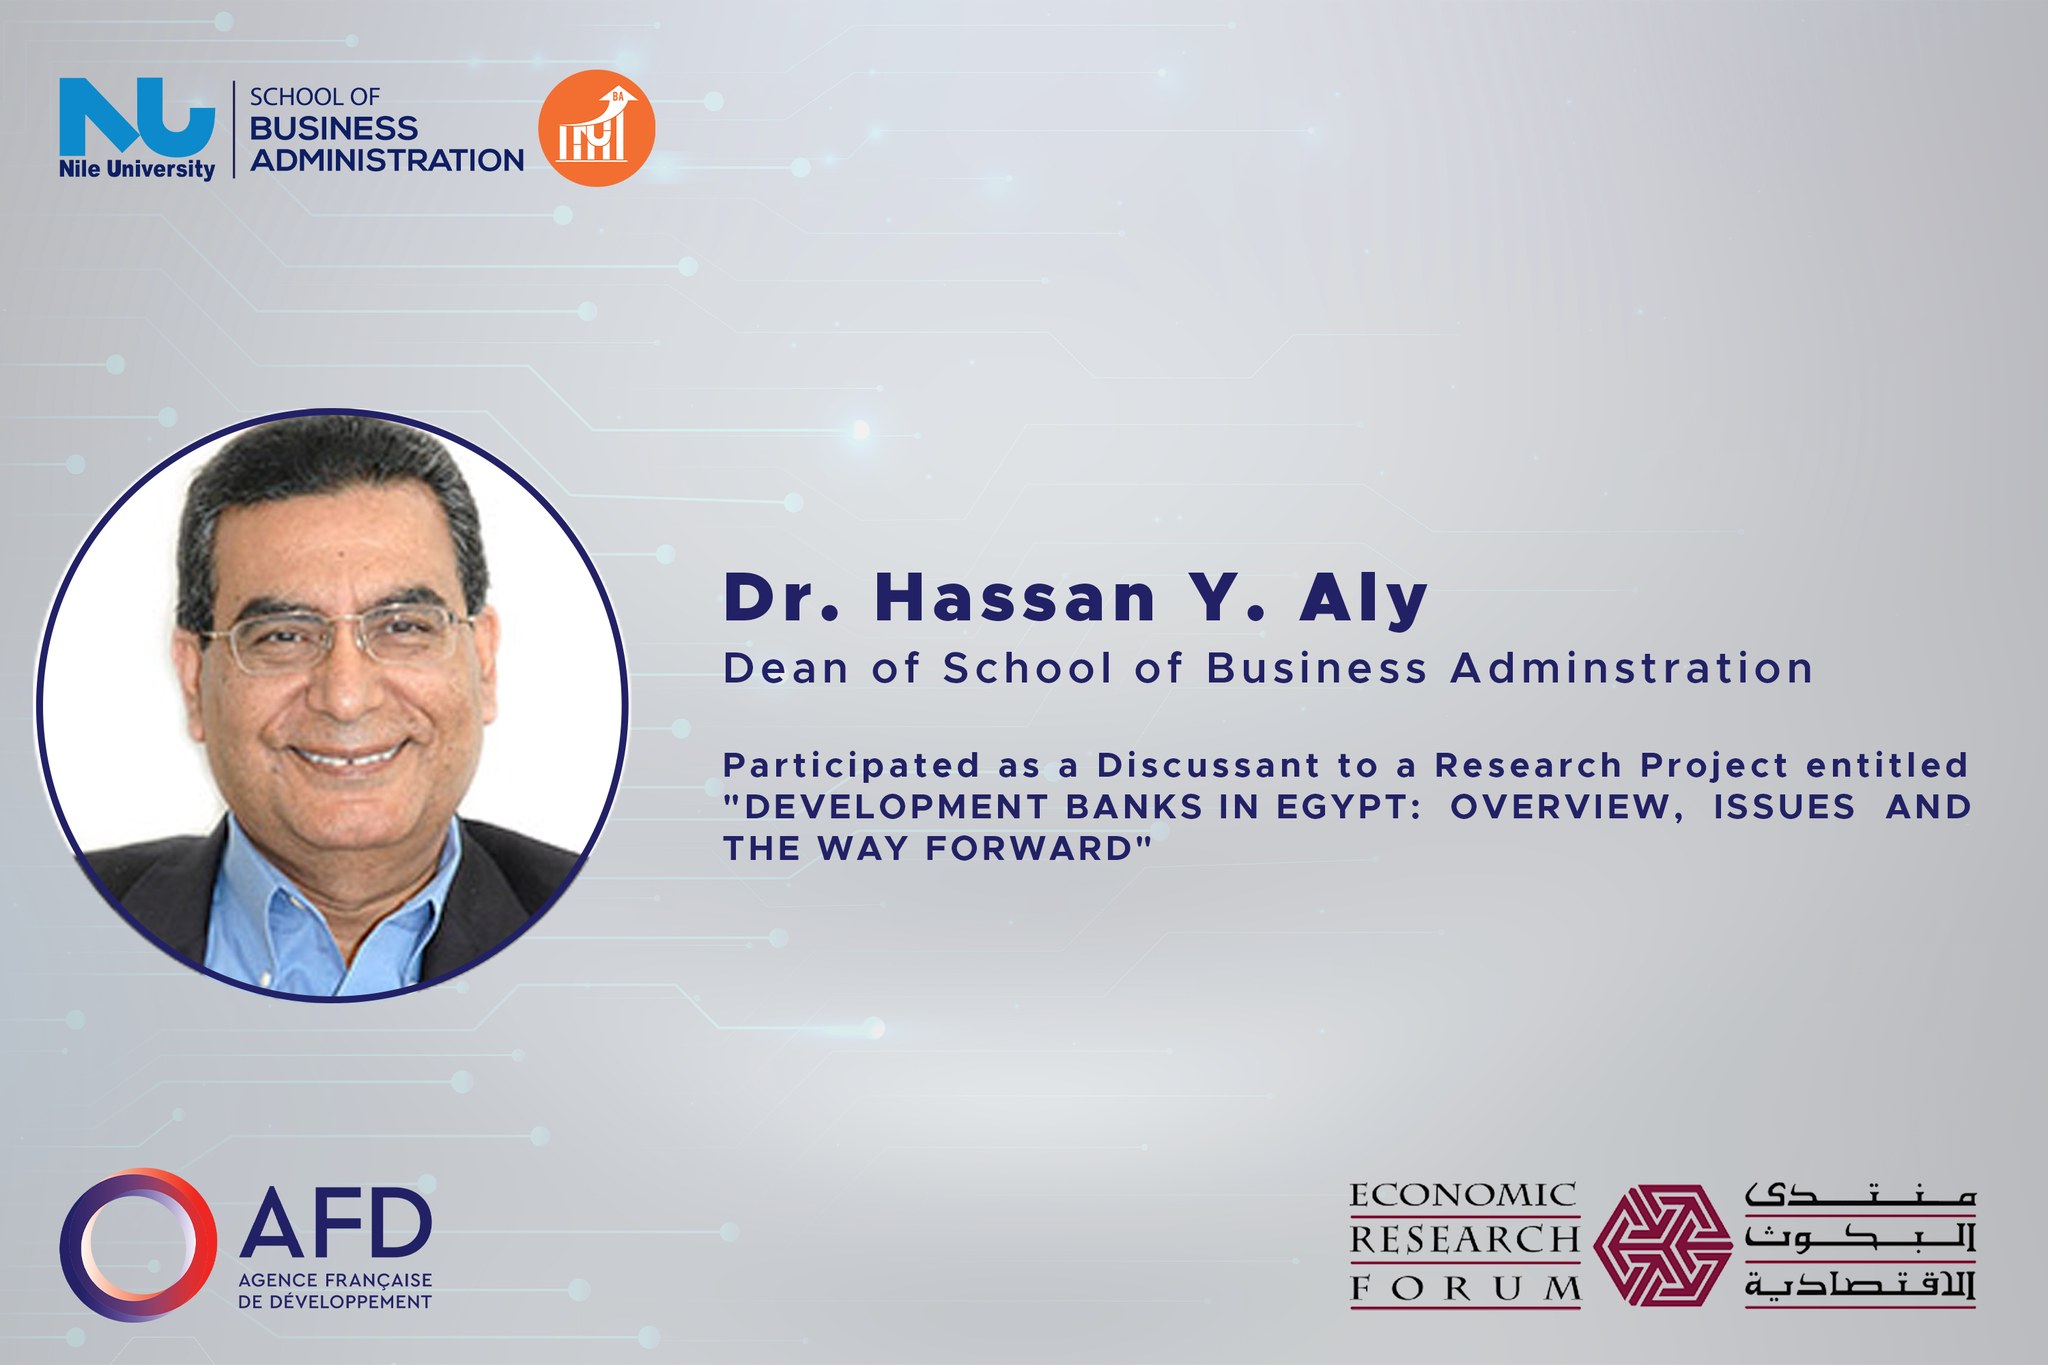 Dr. Hassan Aly Participation as a Discussant at the Economic Research Forum